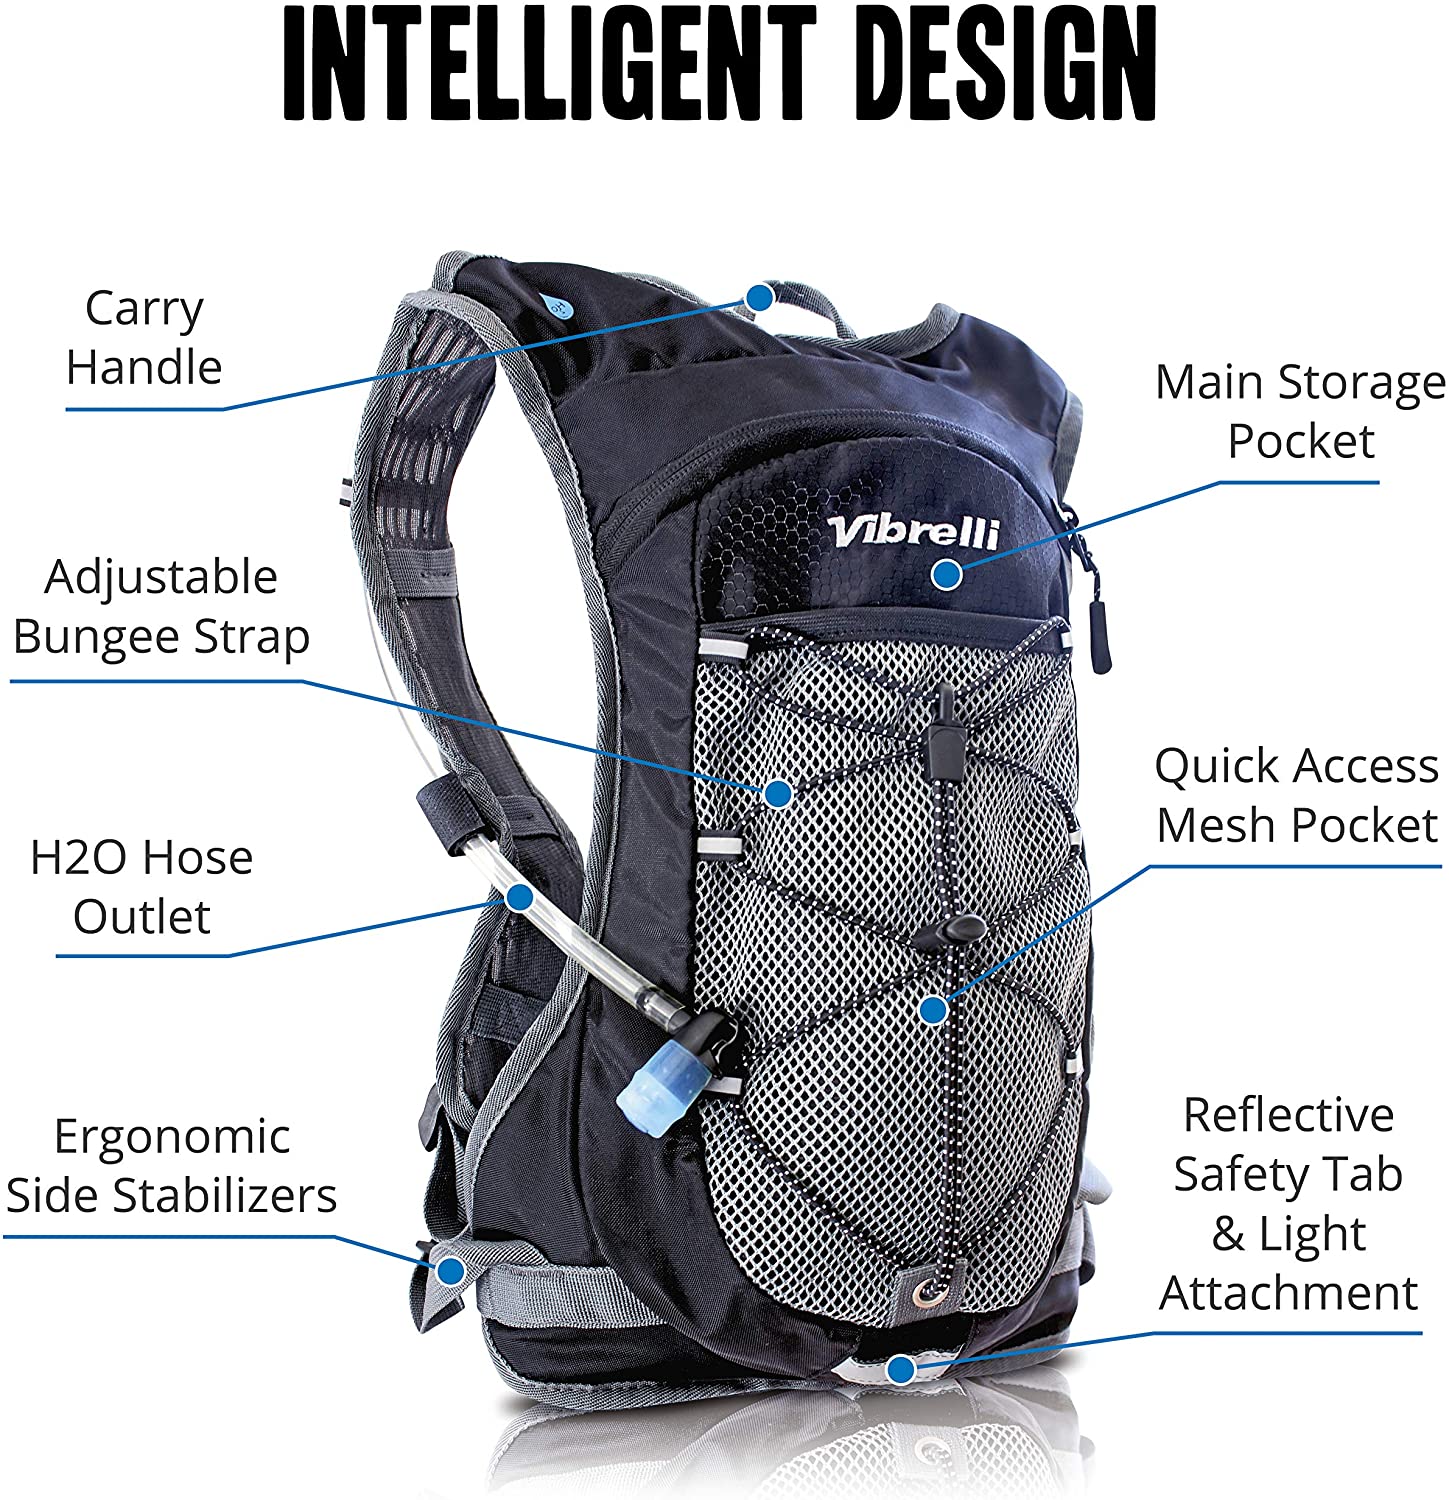 Mxxy hydration pack review